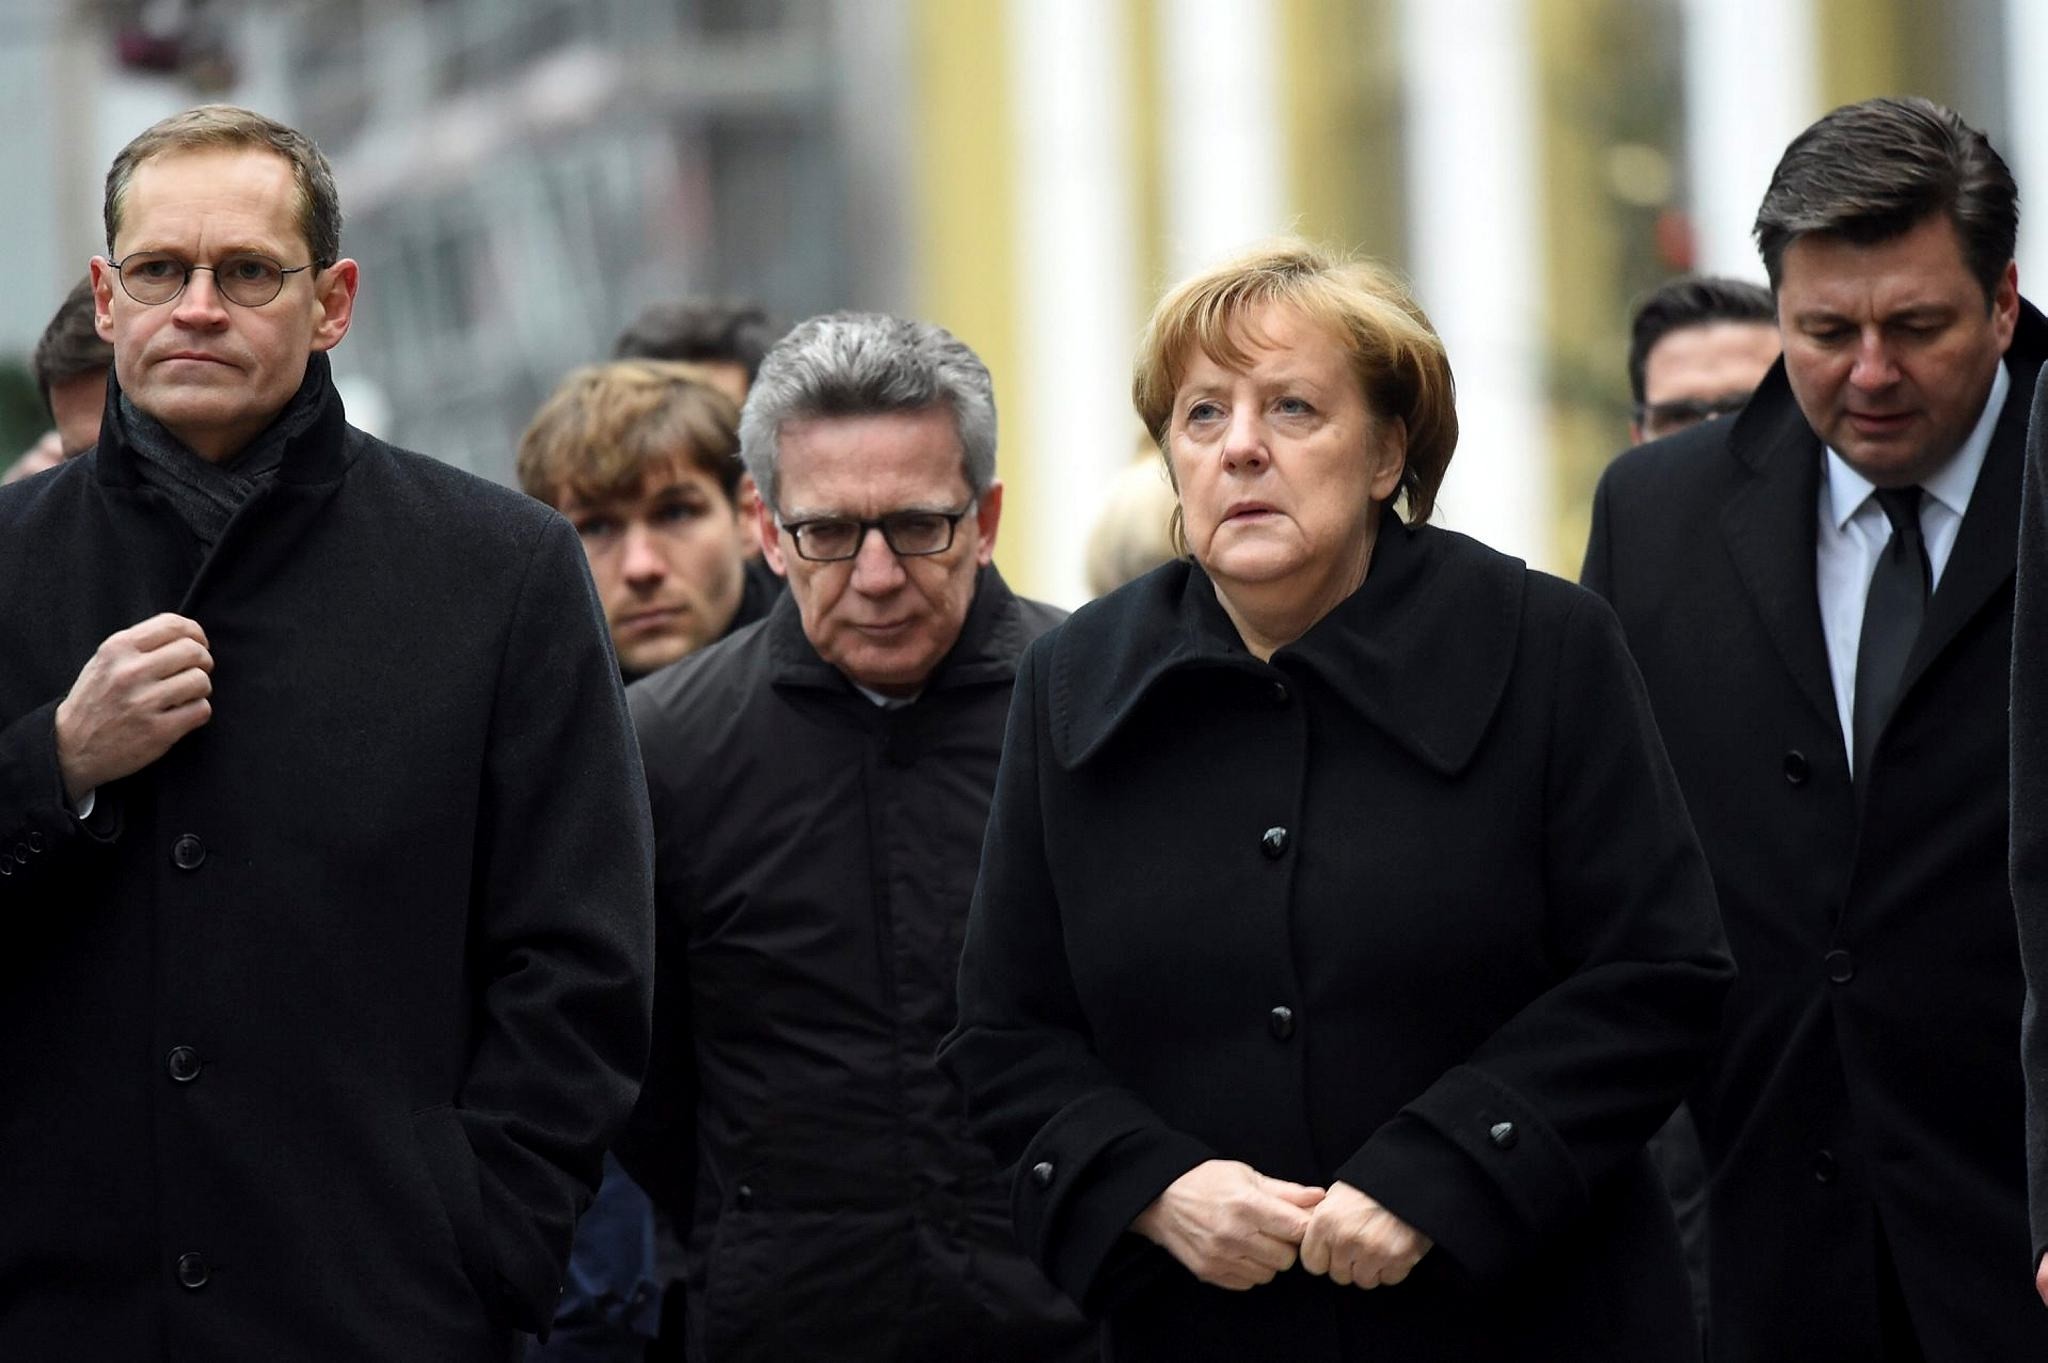 Berlin Mayor Michael Mueller (L), German Interior Minister Thomas de Maiziere (C) and German Chancellor Angela Merkel (R) visit the scene of an attack on a Christmas market in Berlin, Germany.